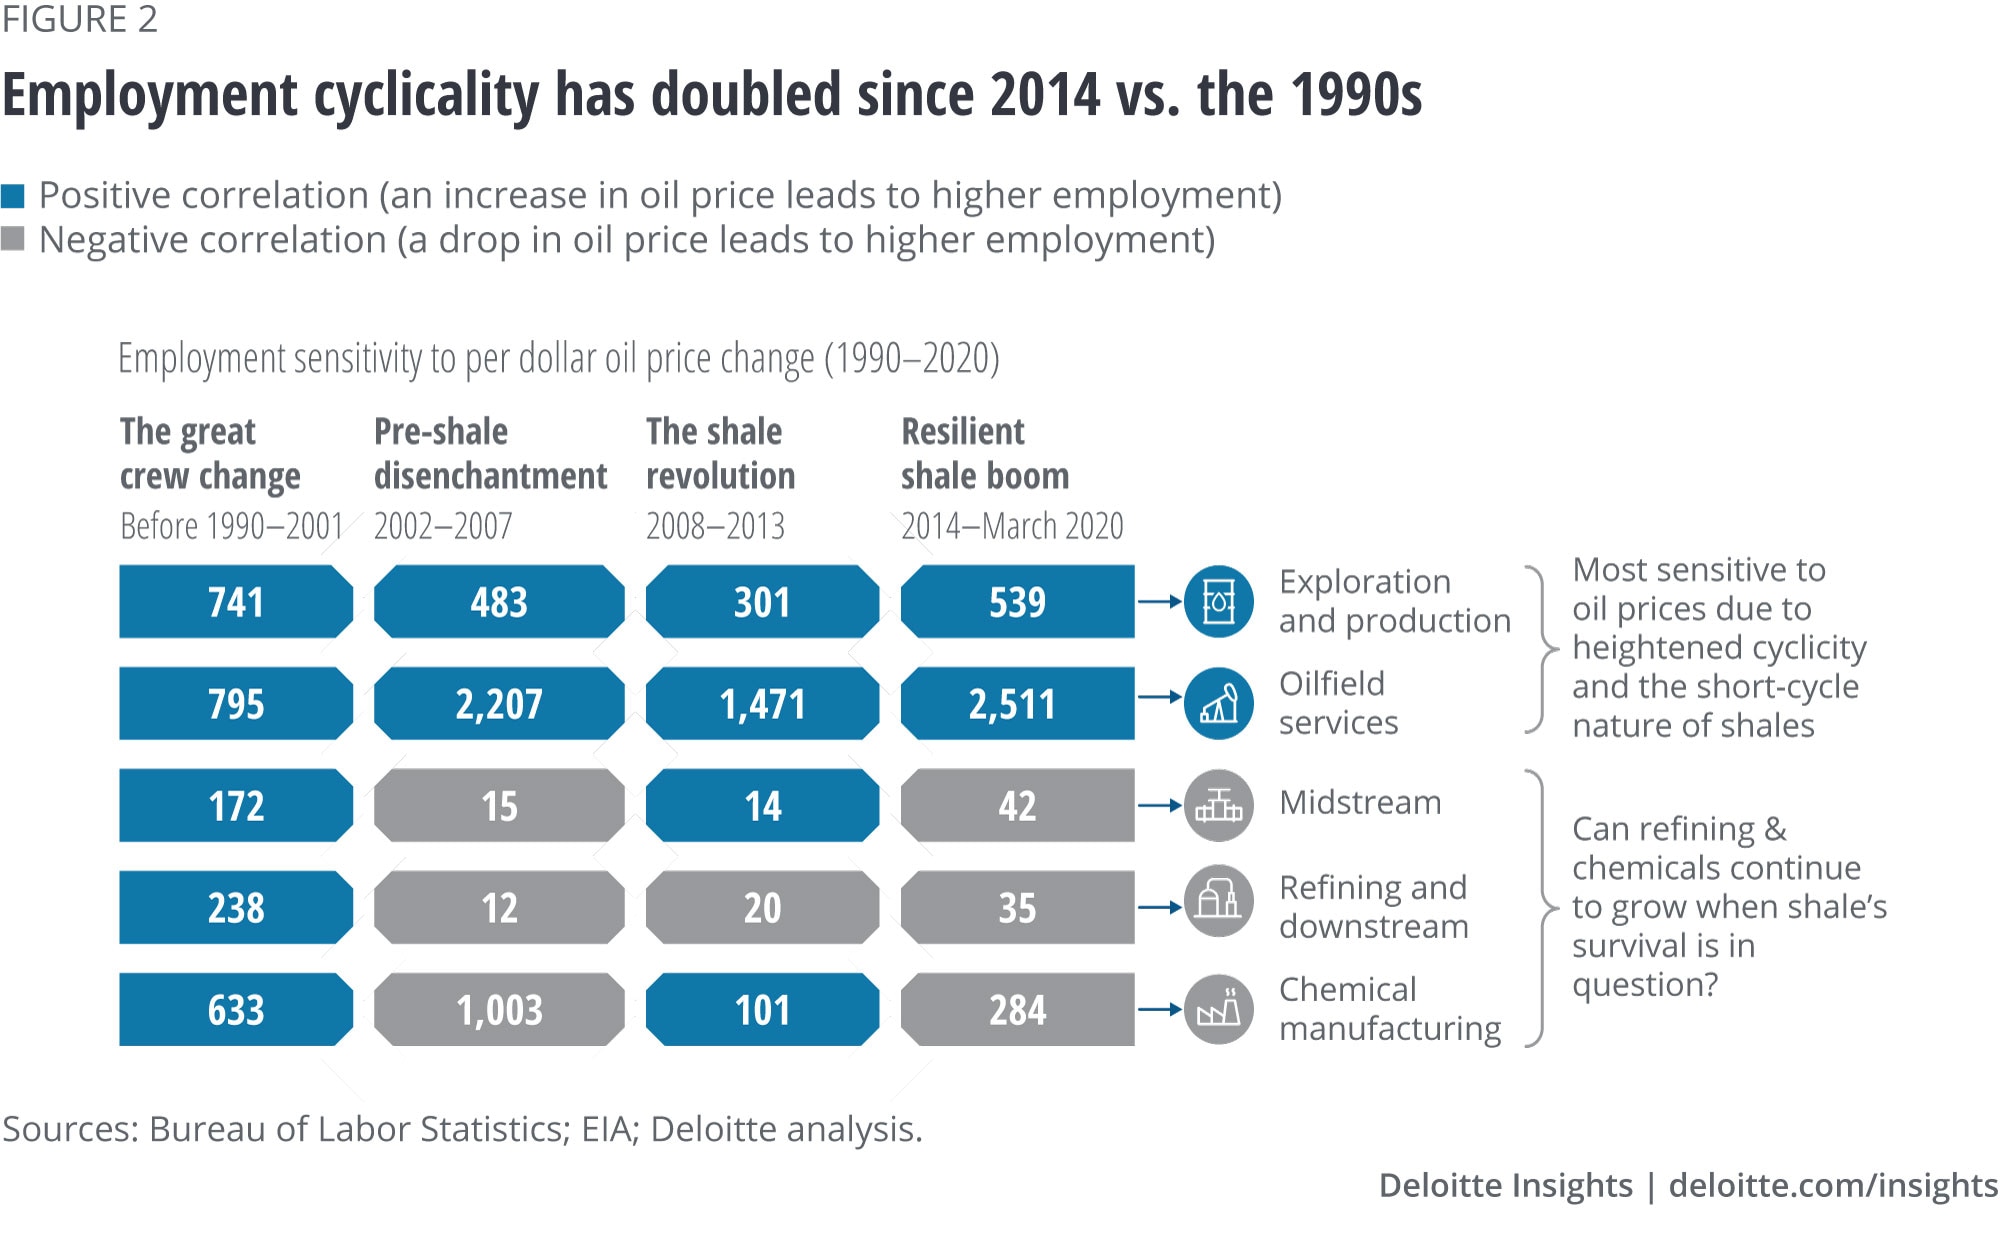 Employment cyclicality has doubled since 2014 vs. the 1990s